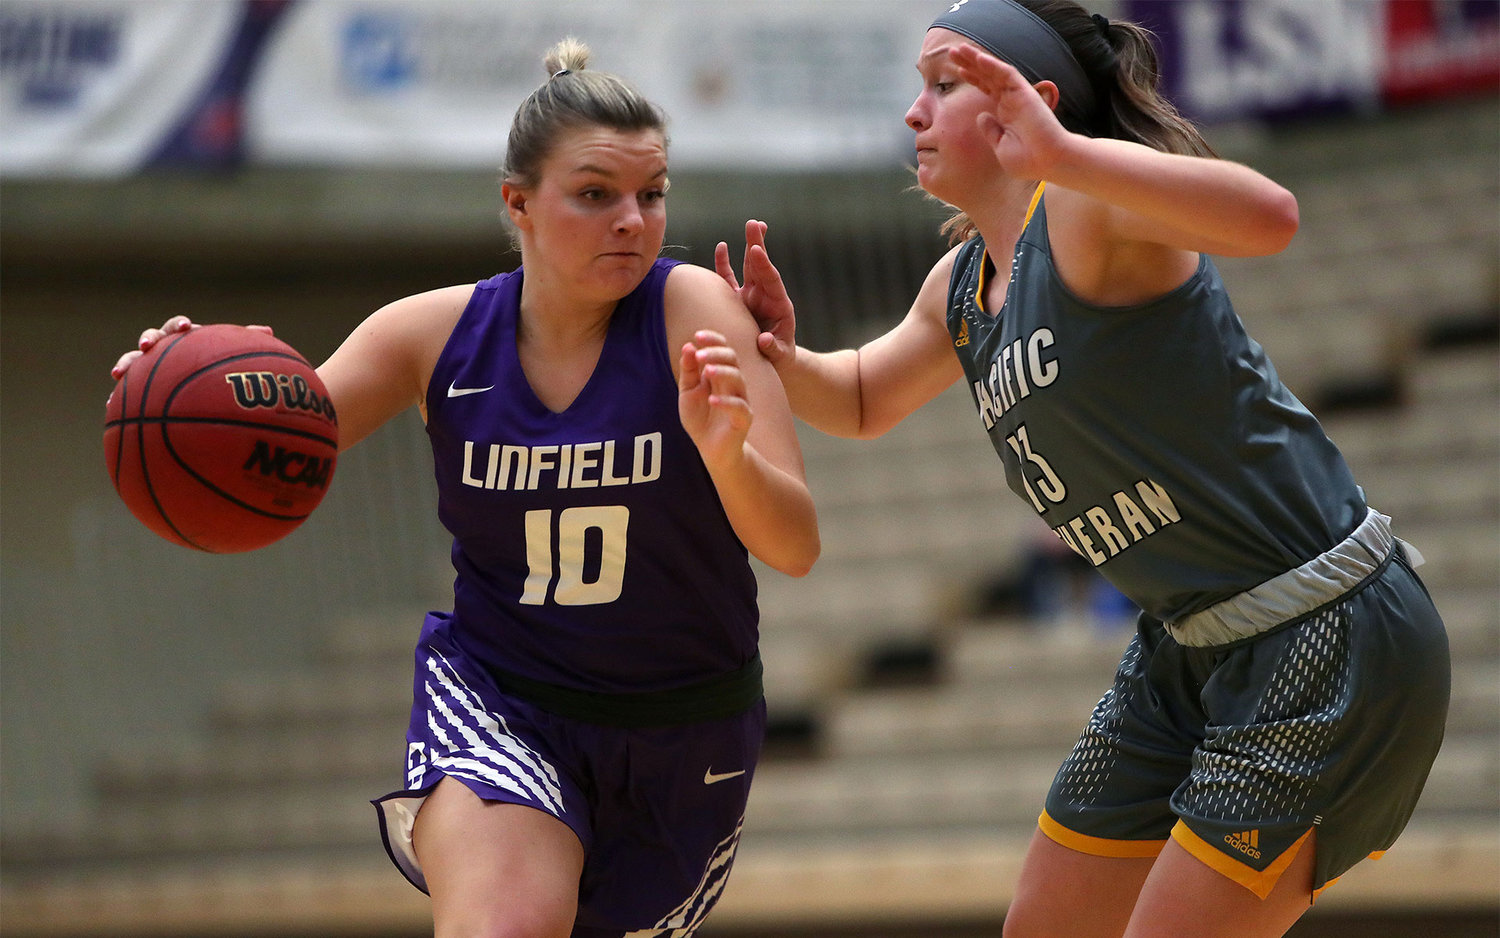 Shasta Lofgren led the Northwest Conference in rebounding with nine boards per game, and led Linfield University in scoring with 12.6 points per game during the 2021 season.